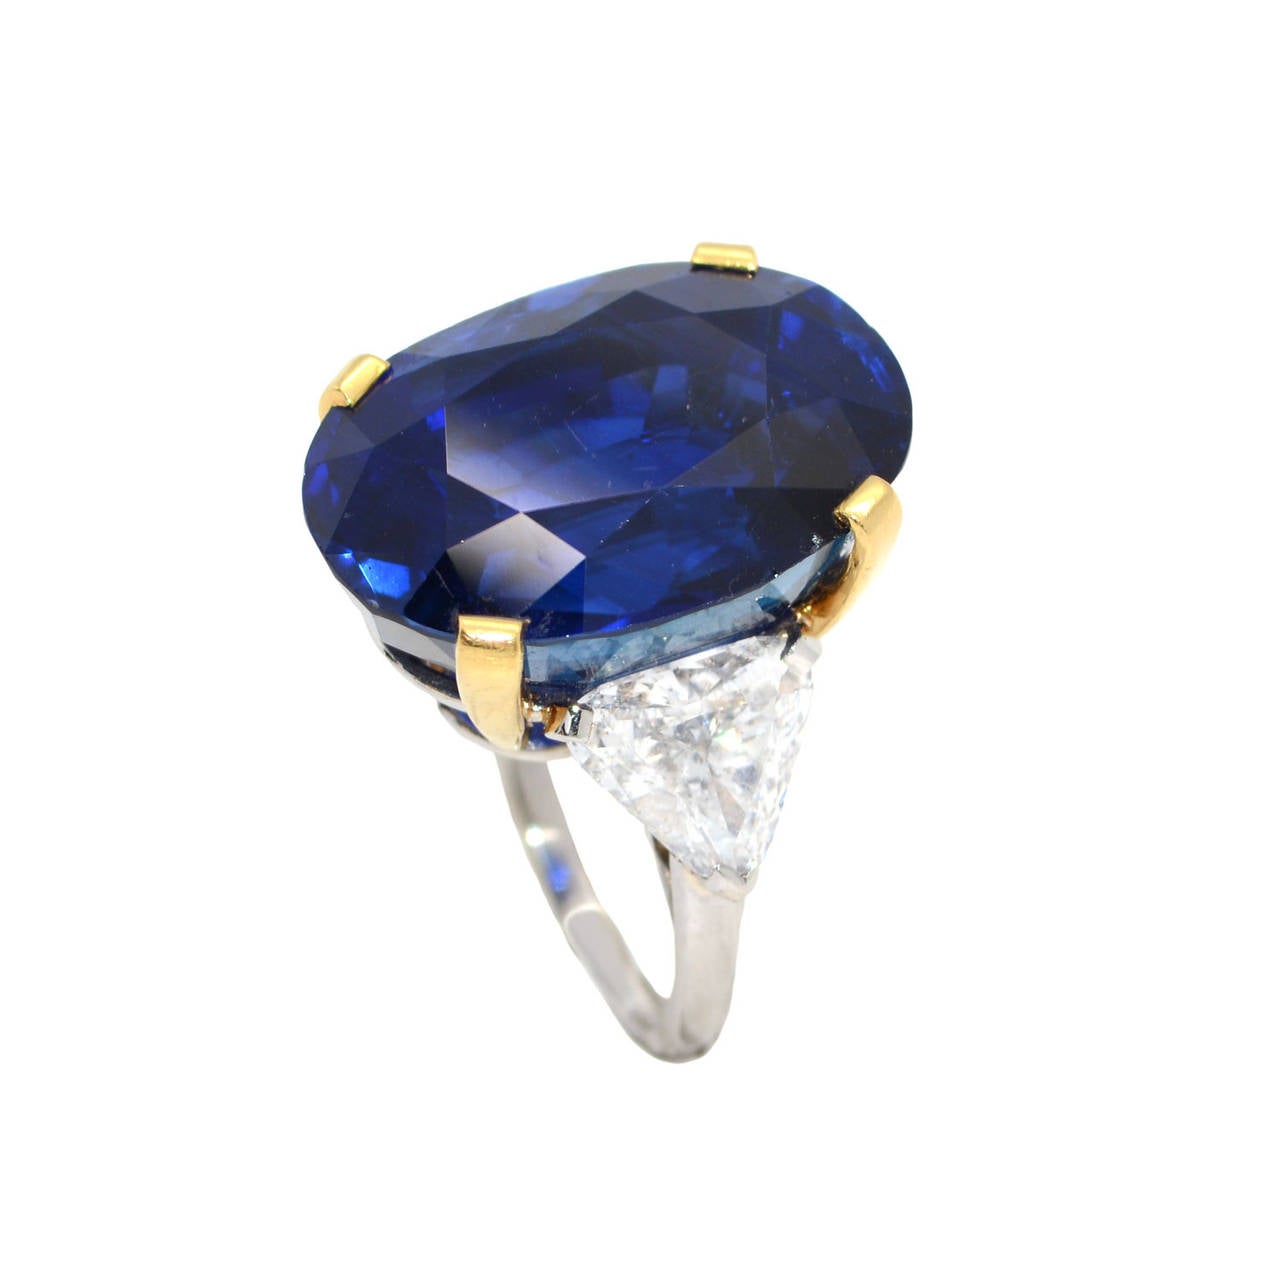 Signed Bulgari, 1980s. The huge blue velvet sapphire with a total weight of 34.09 carats. On the sides triangular cut diamond. Attached a Gubelin Certificate that attests that the sapphire has not been heated. This lot for sale with Customer to